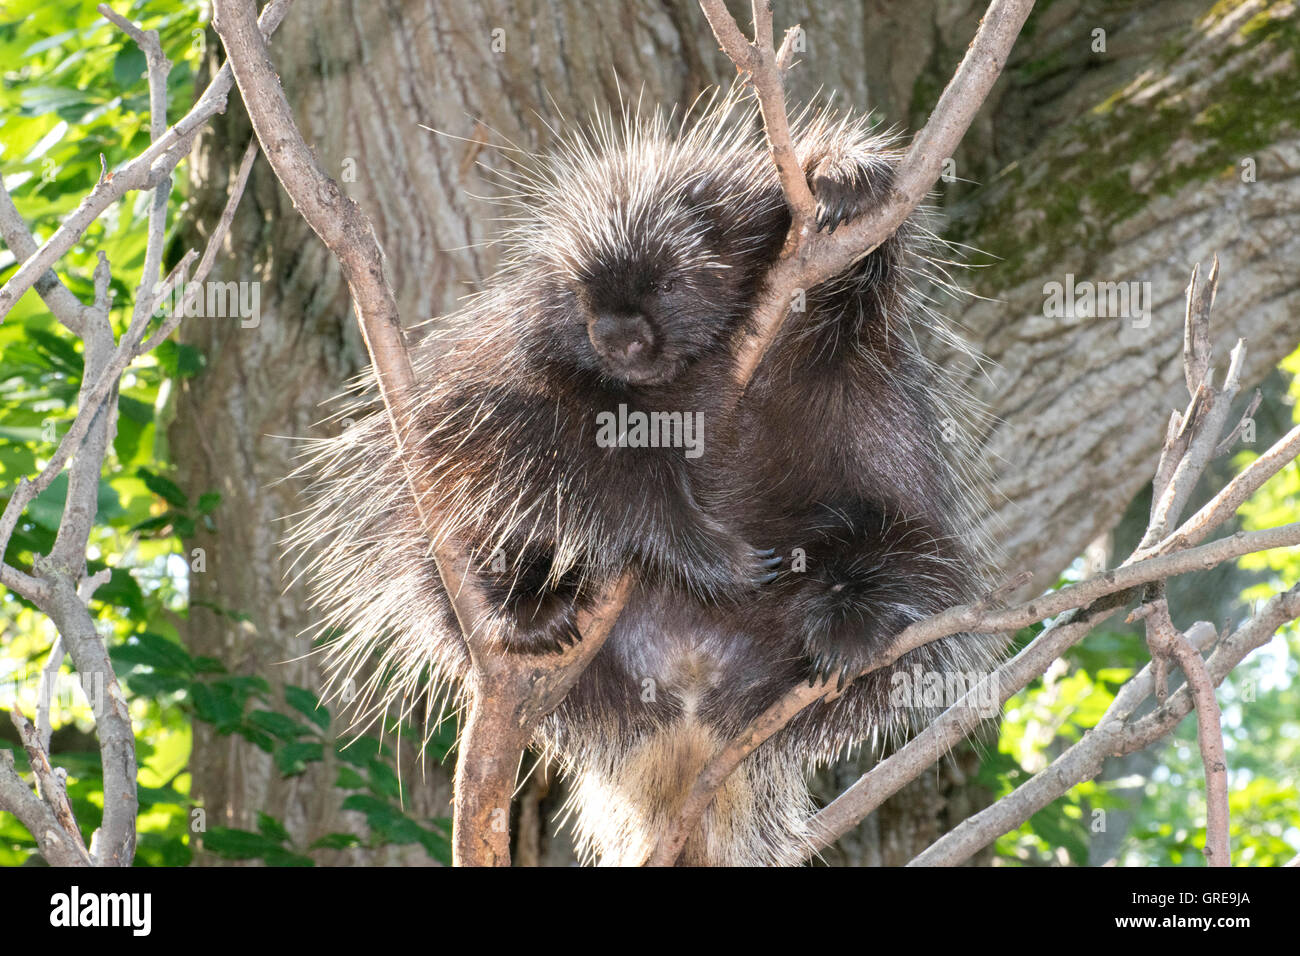 Close-up of a Common Porcupine. Stock Photo